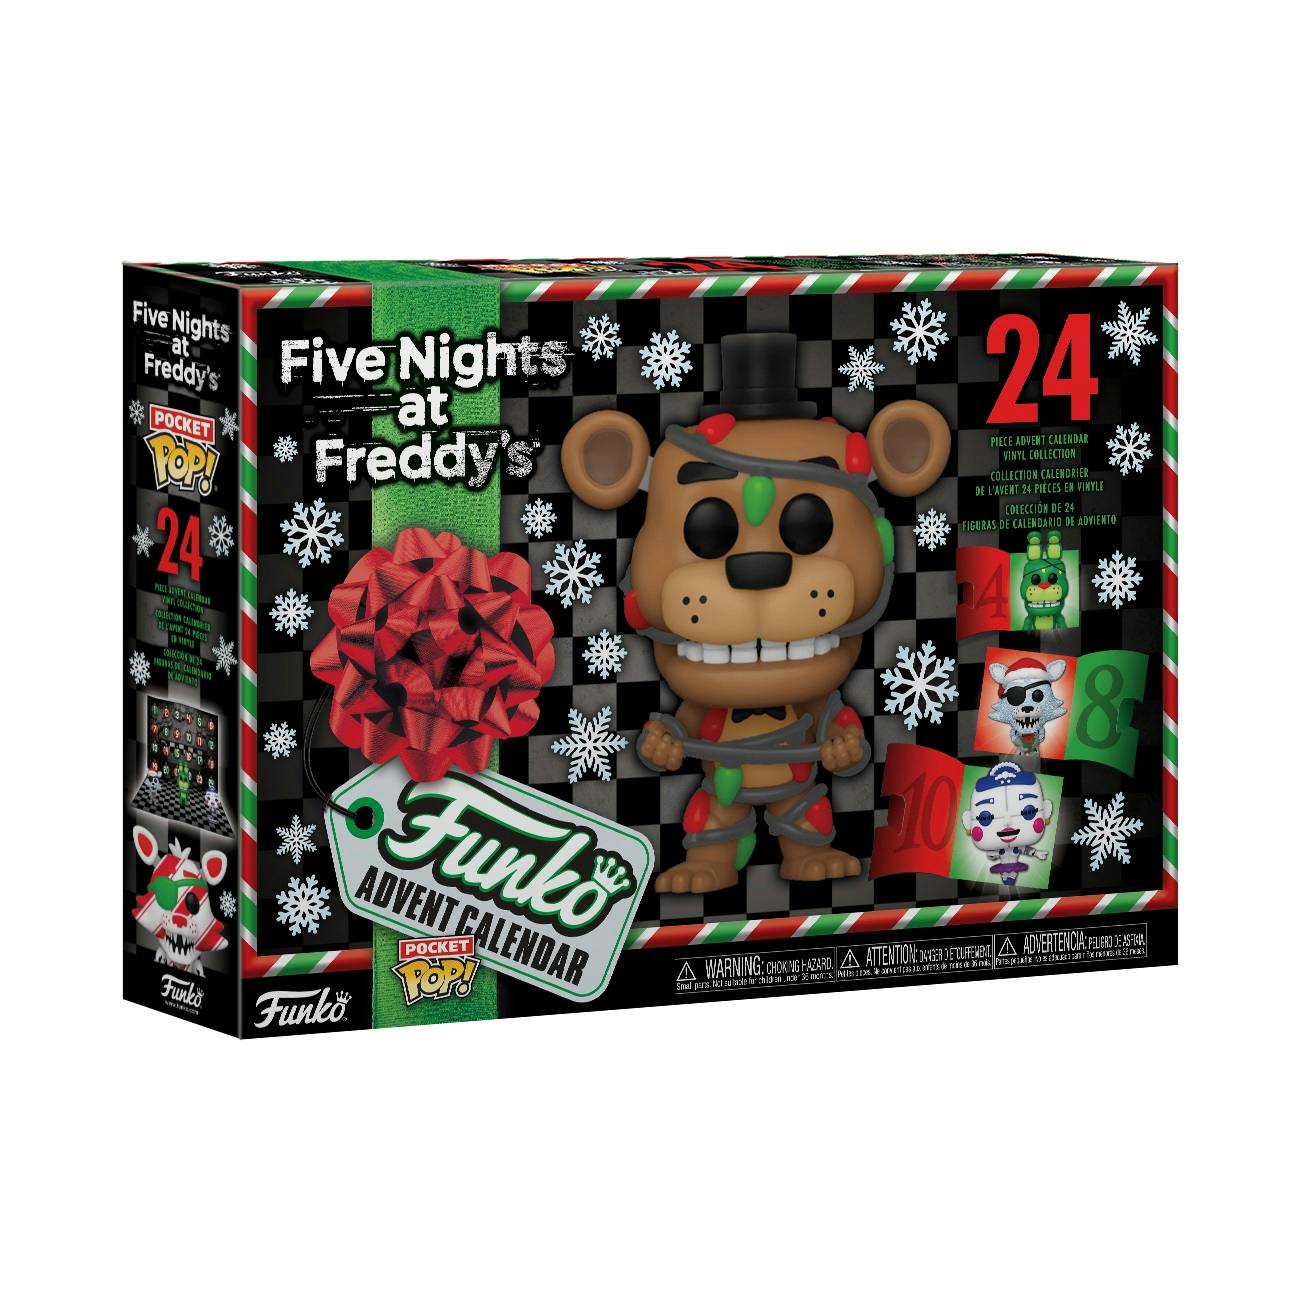 Acheter Funko Advent Calendar 2023: Five Nights at Freddy's Holiday -  Figurines prix promo neuf et occasion pas cher